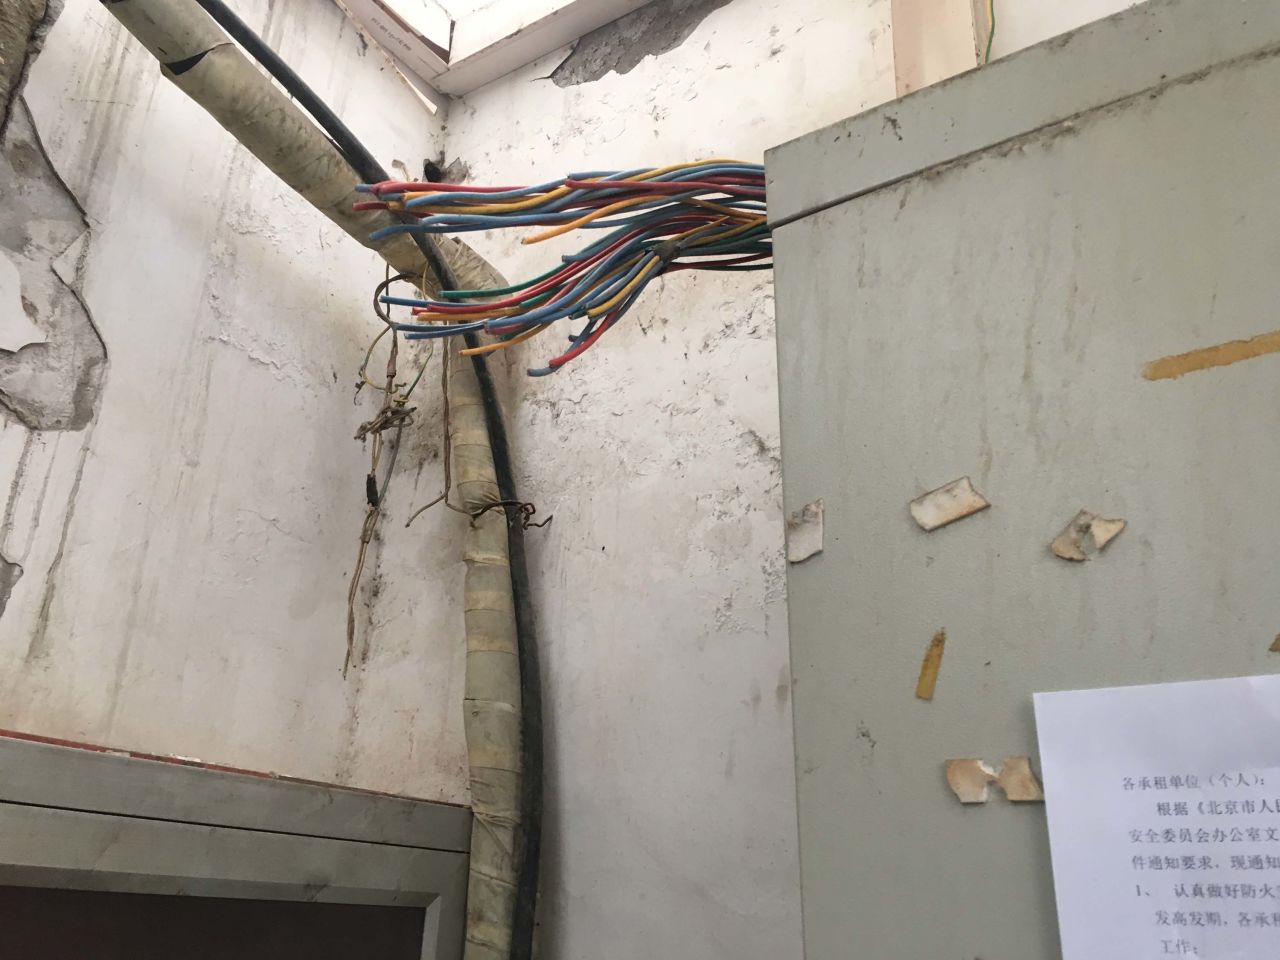 The electrical wires in a cleared building have been cut. According to the building's landlord, authorities cut the wires to ensure the residents being evicted will not move back in.